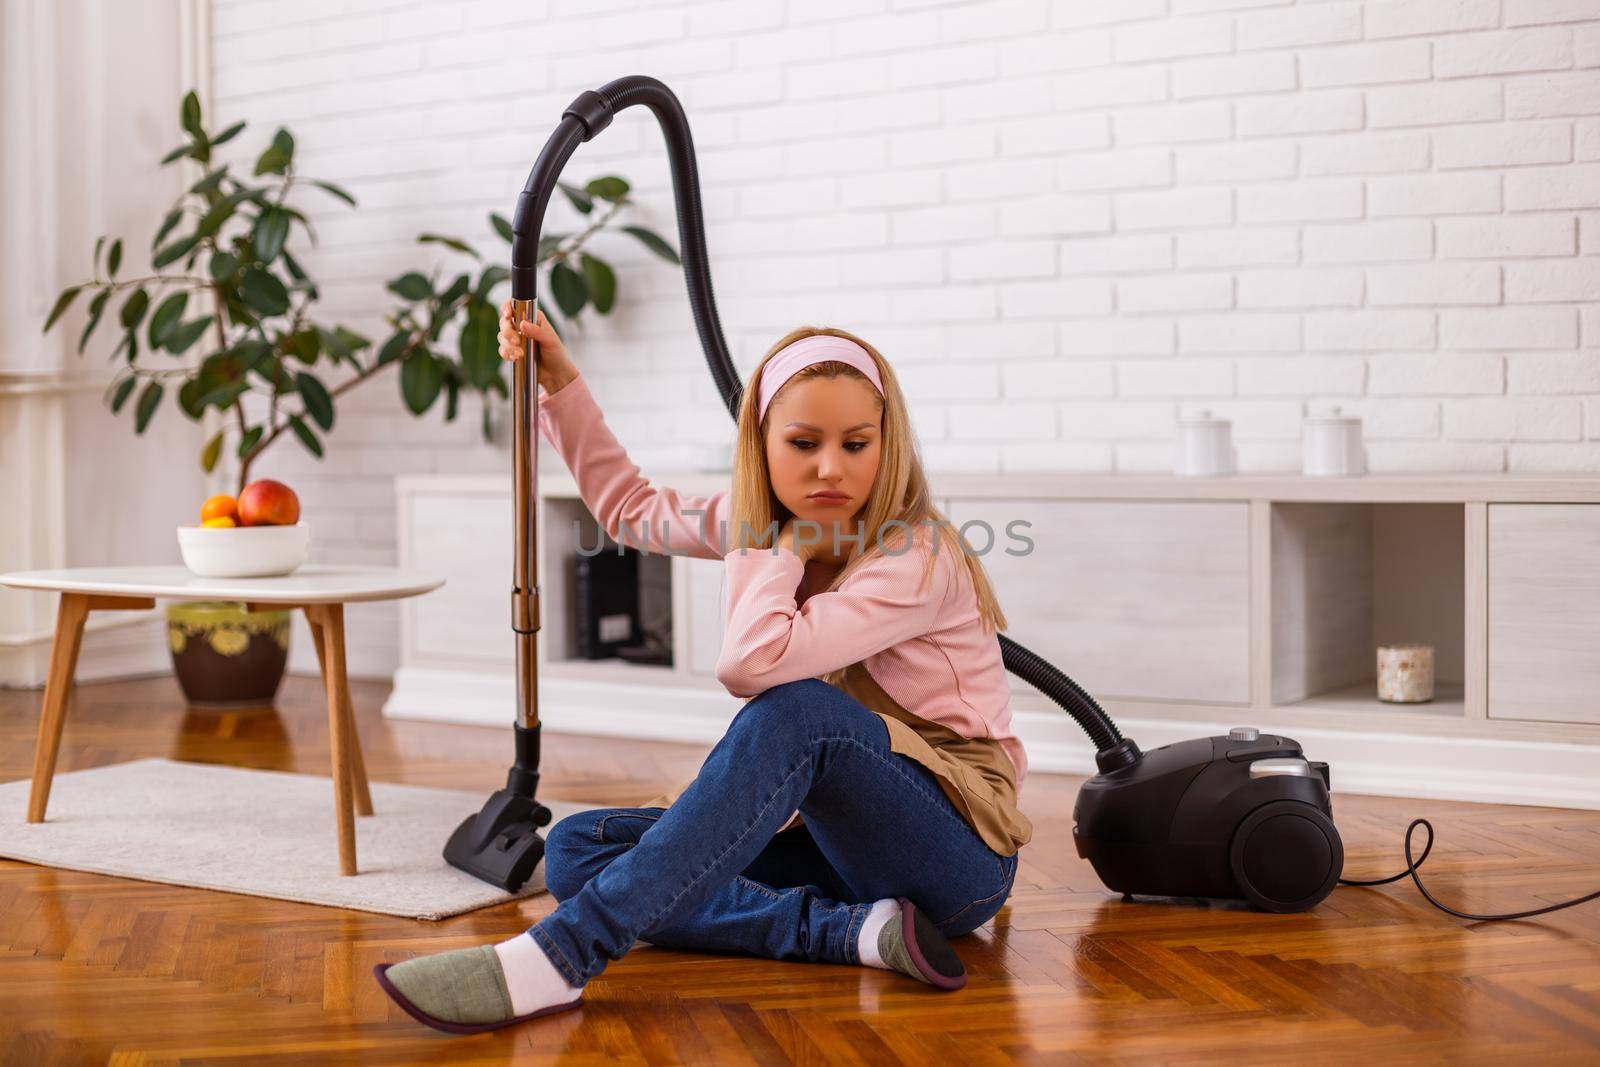 Image of angry and tired housewife with vacuum cleaner  in the living room.